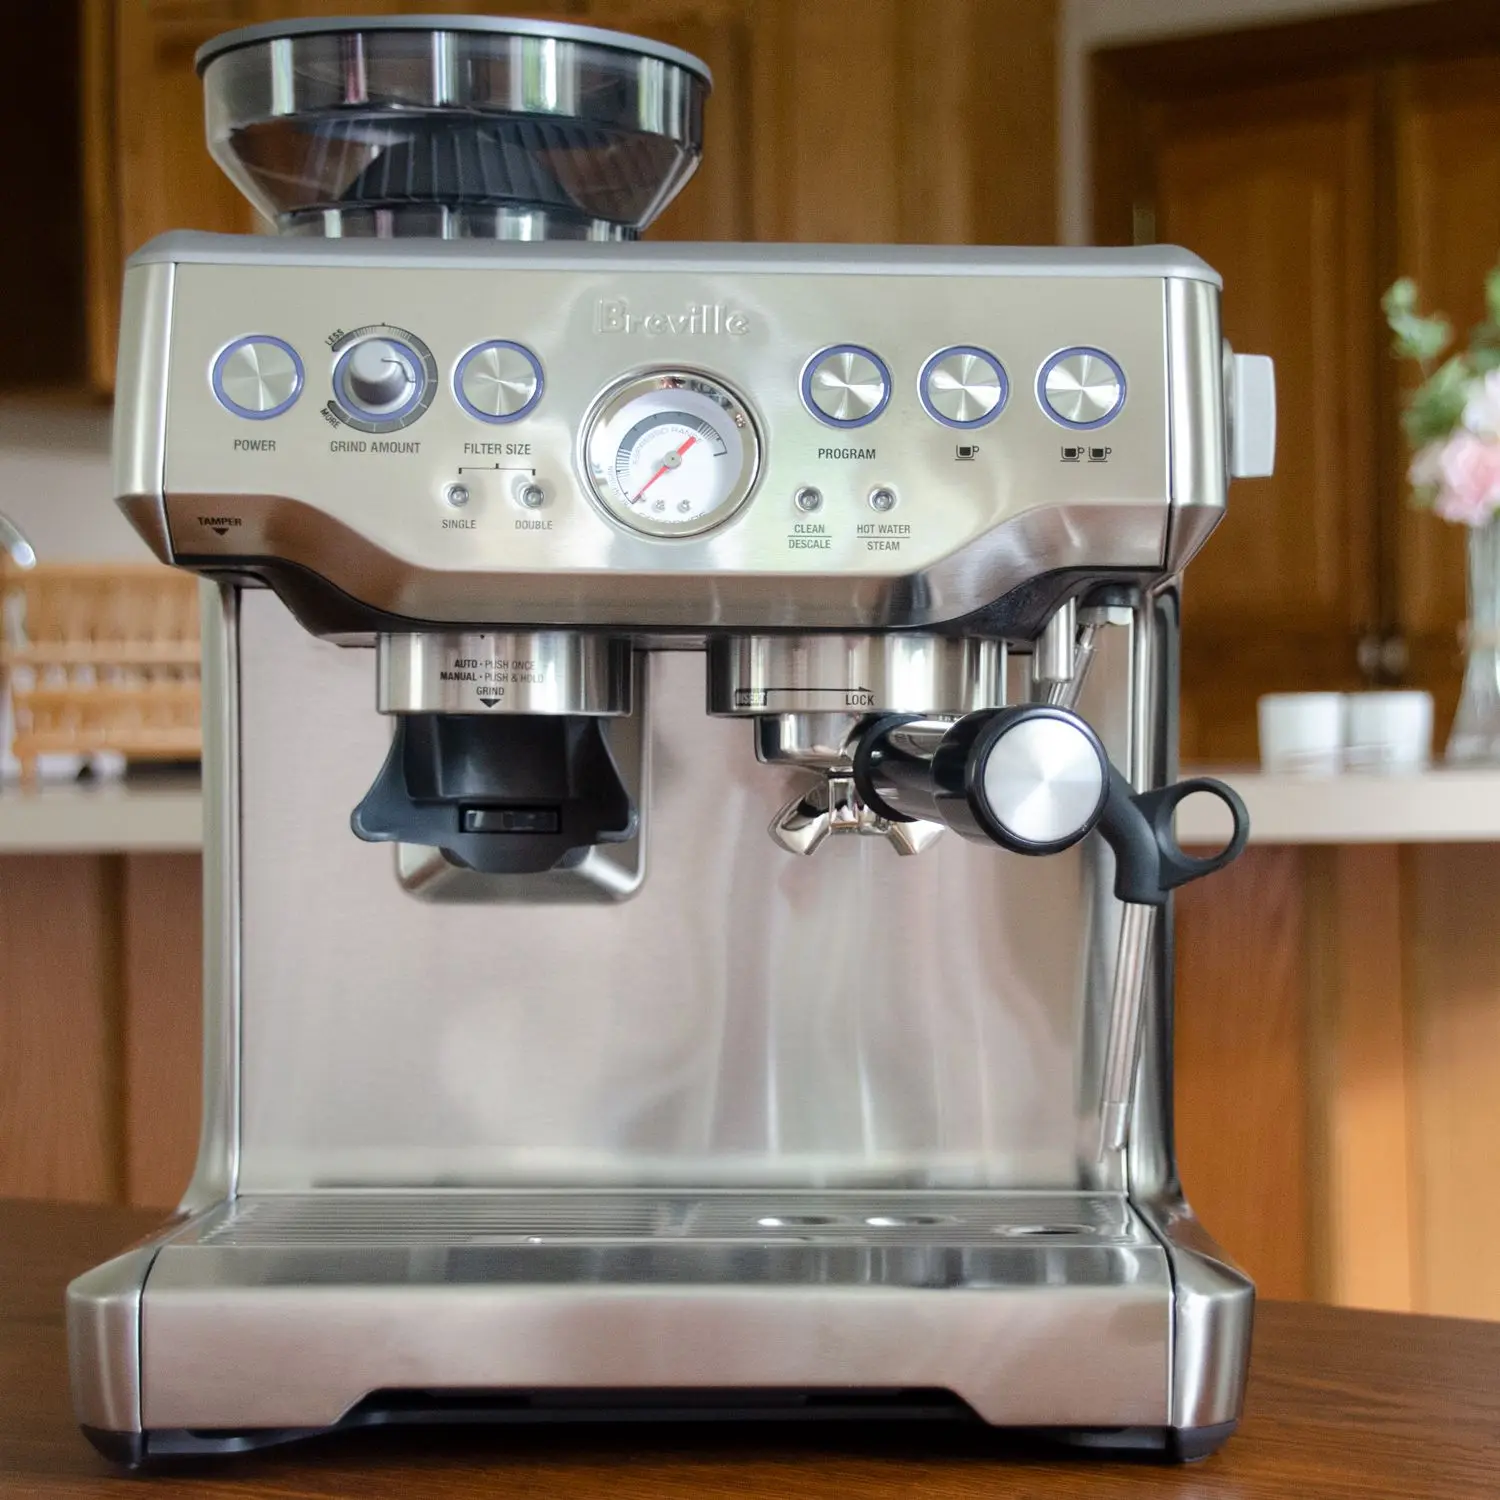 How To Clean Descale Breville Barista Express